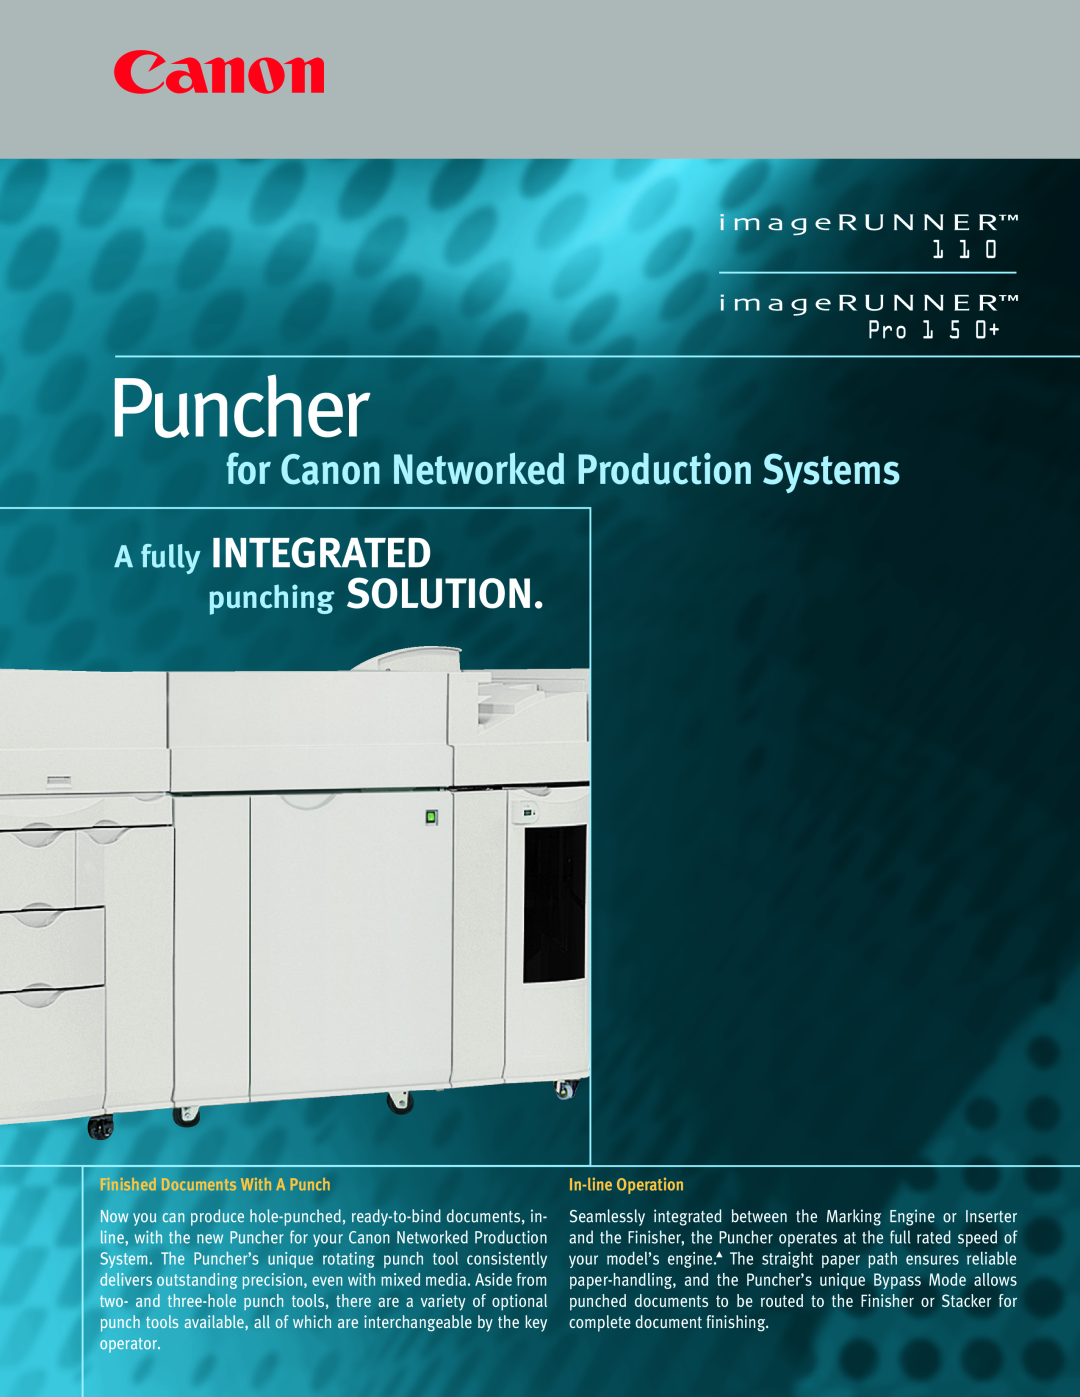 Canon 110 manual Finished Documents With A Punch, In-line Operation, Puncher, for Canon Networked Production Systems 